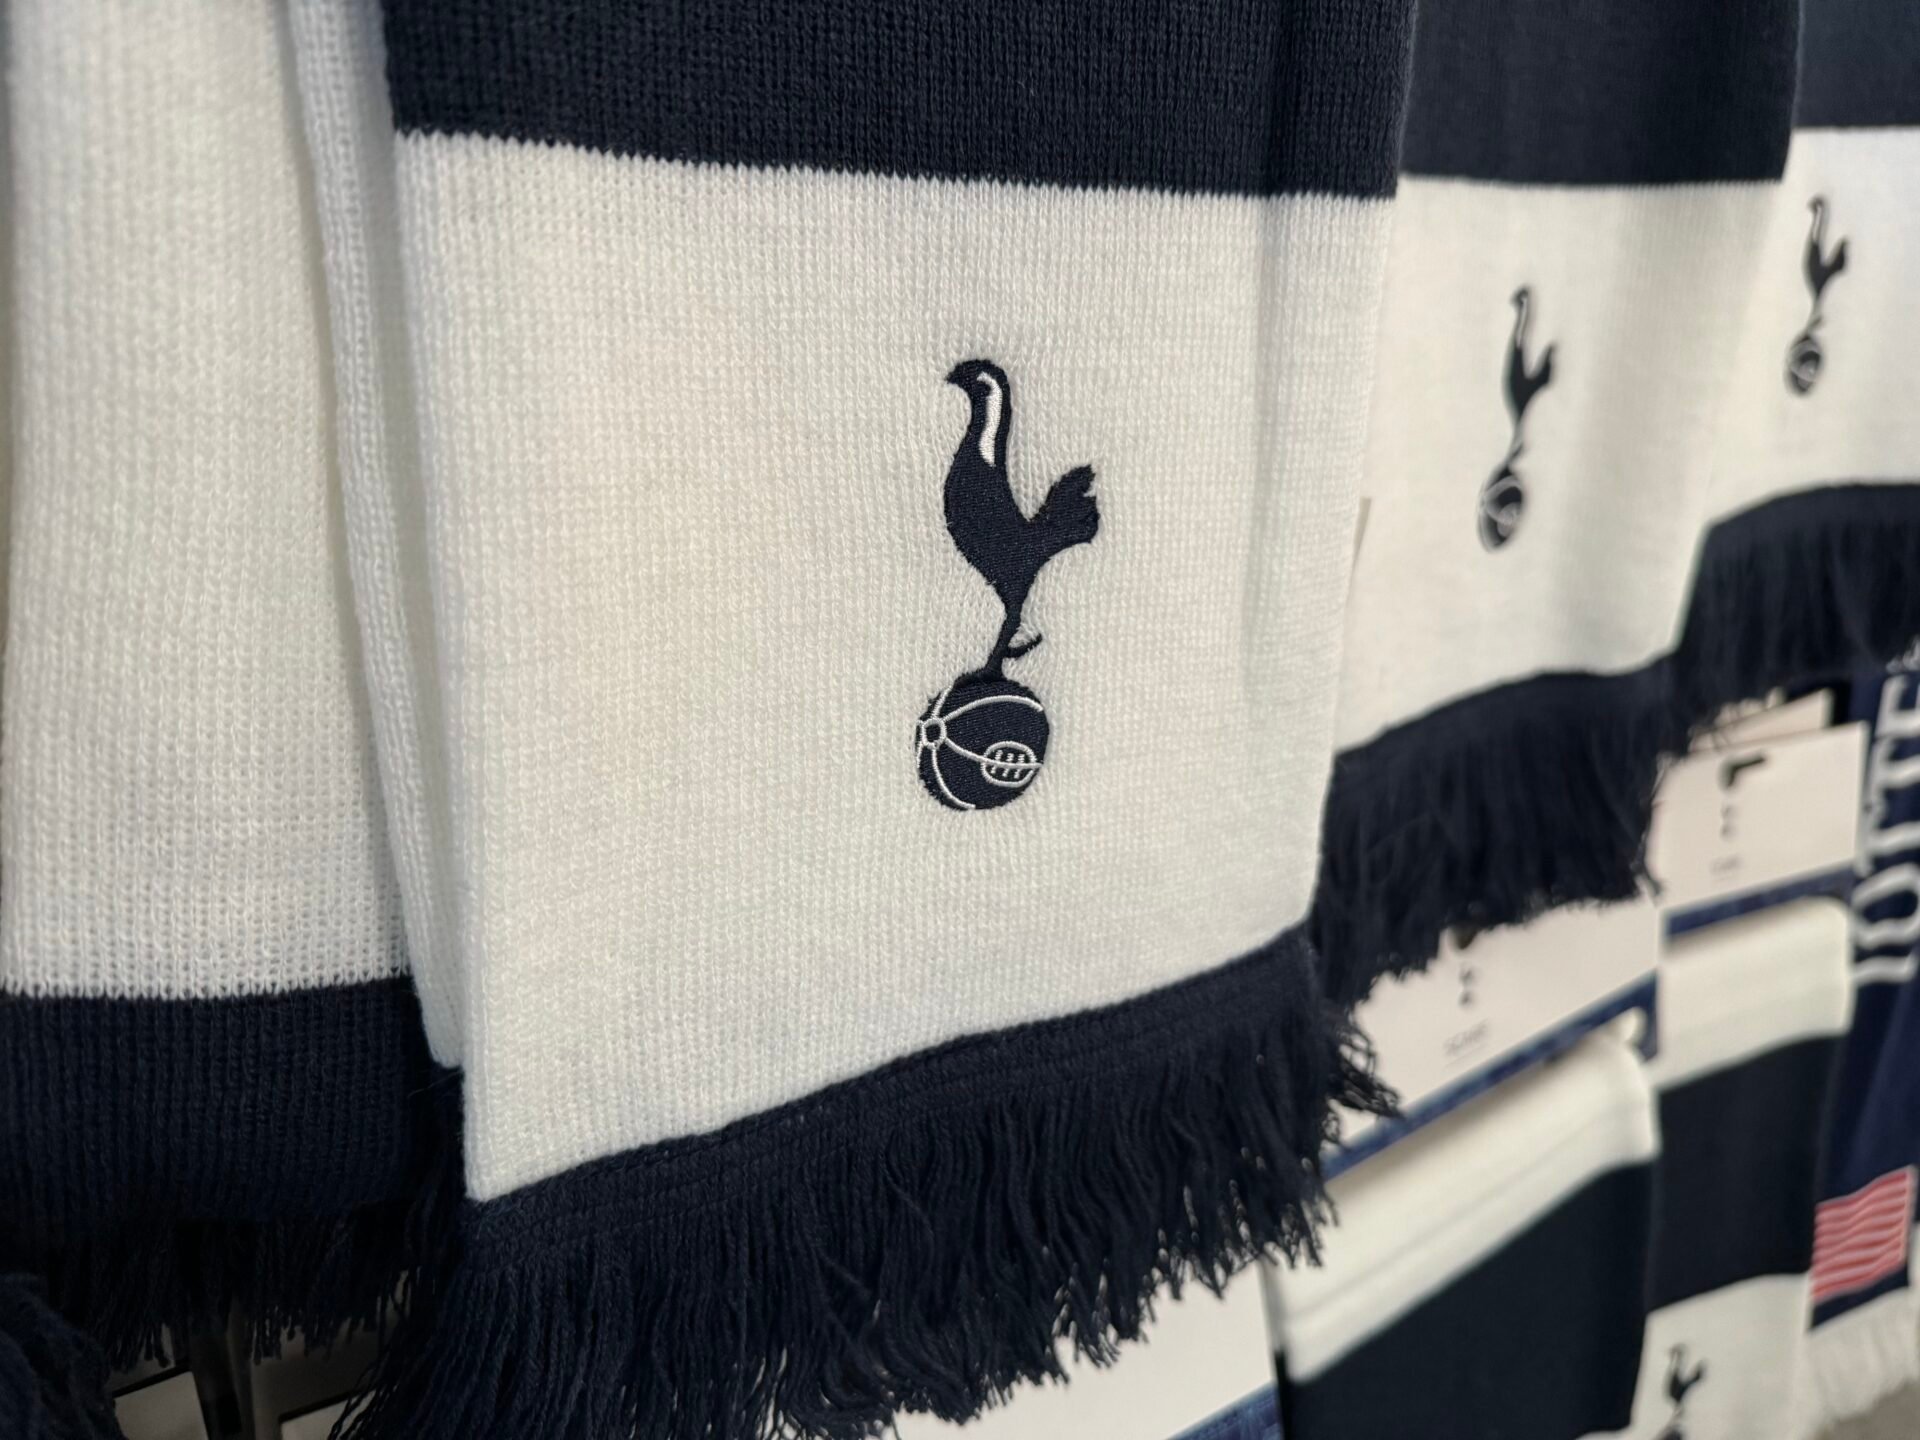 'Don't sell me' - Spurs defender hints at return from injury in social media post